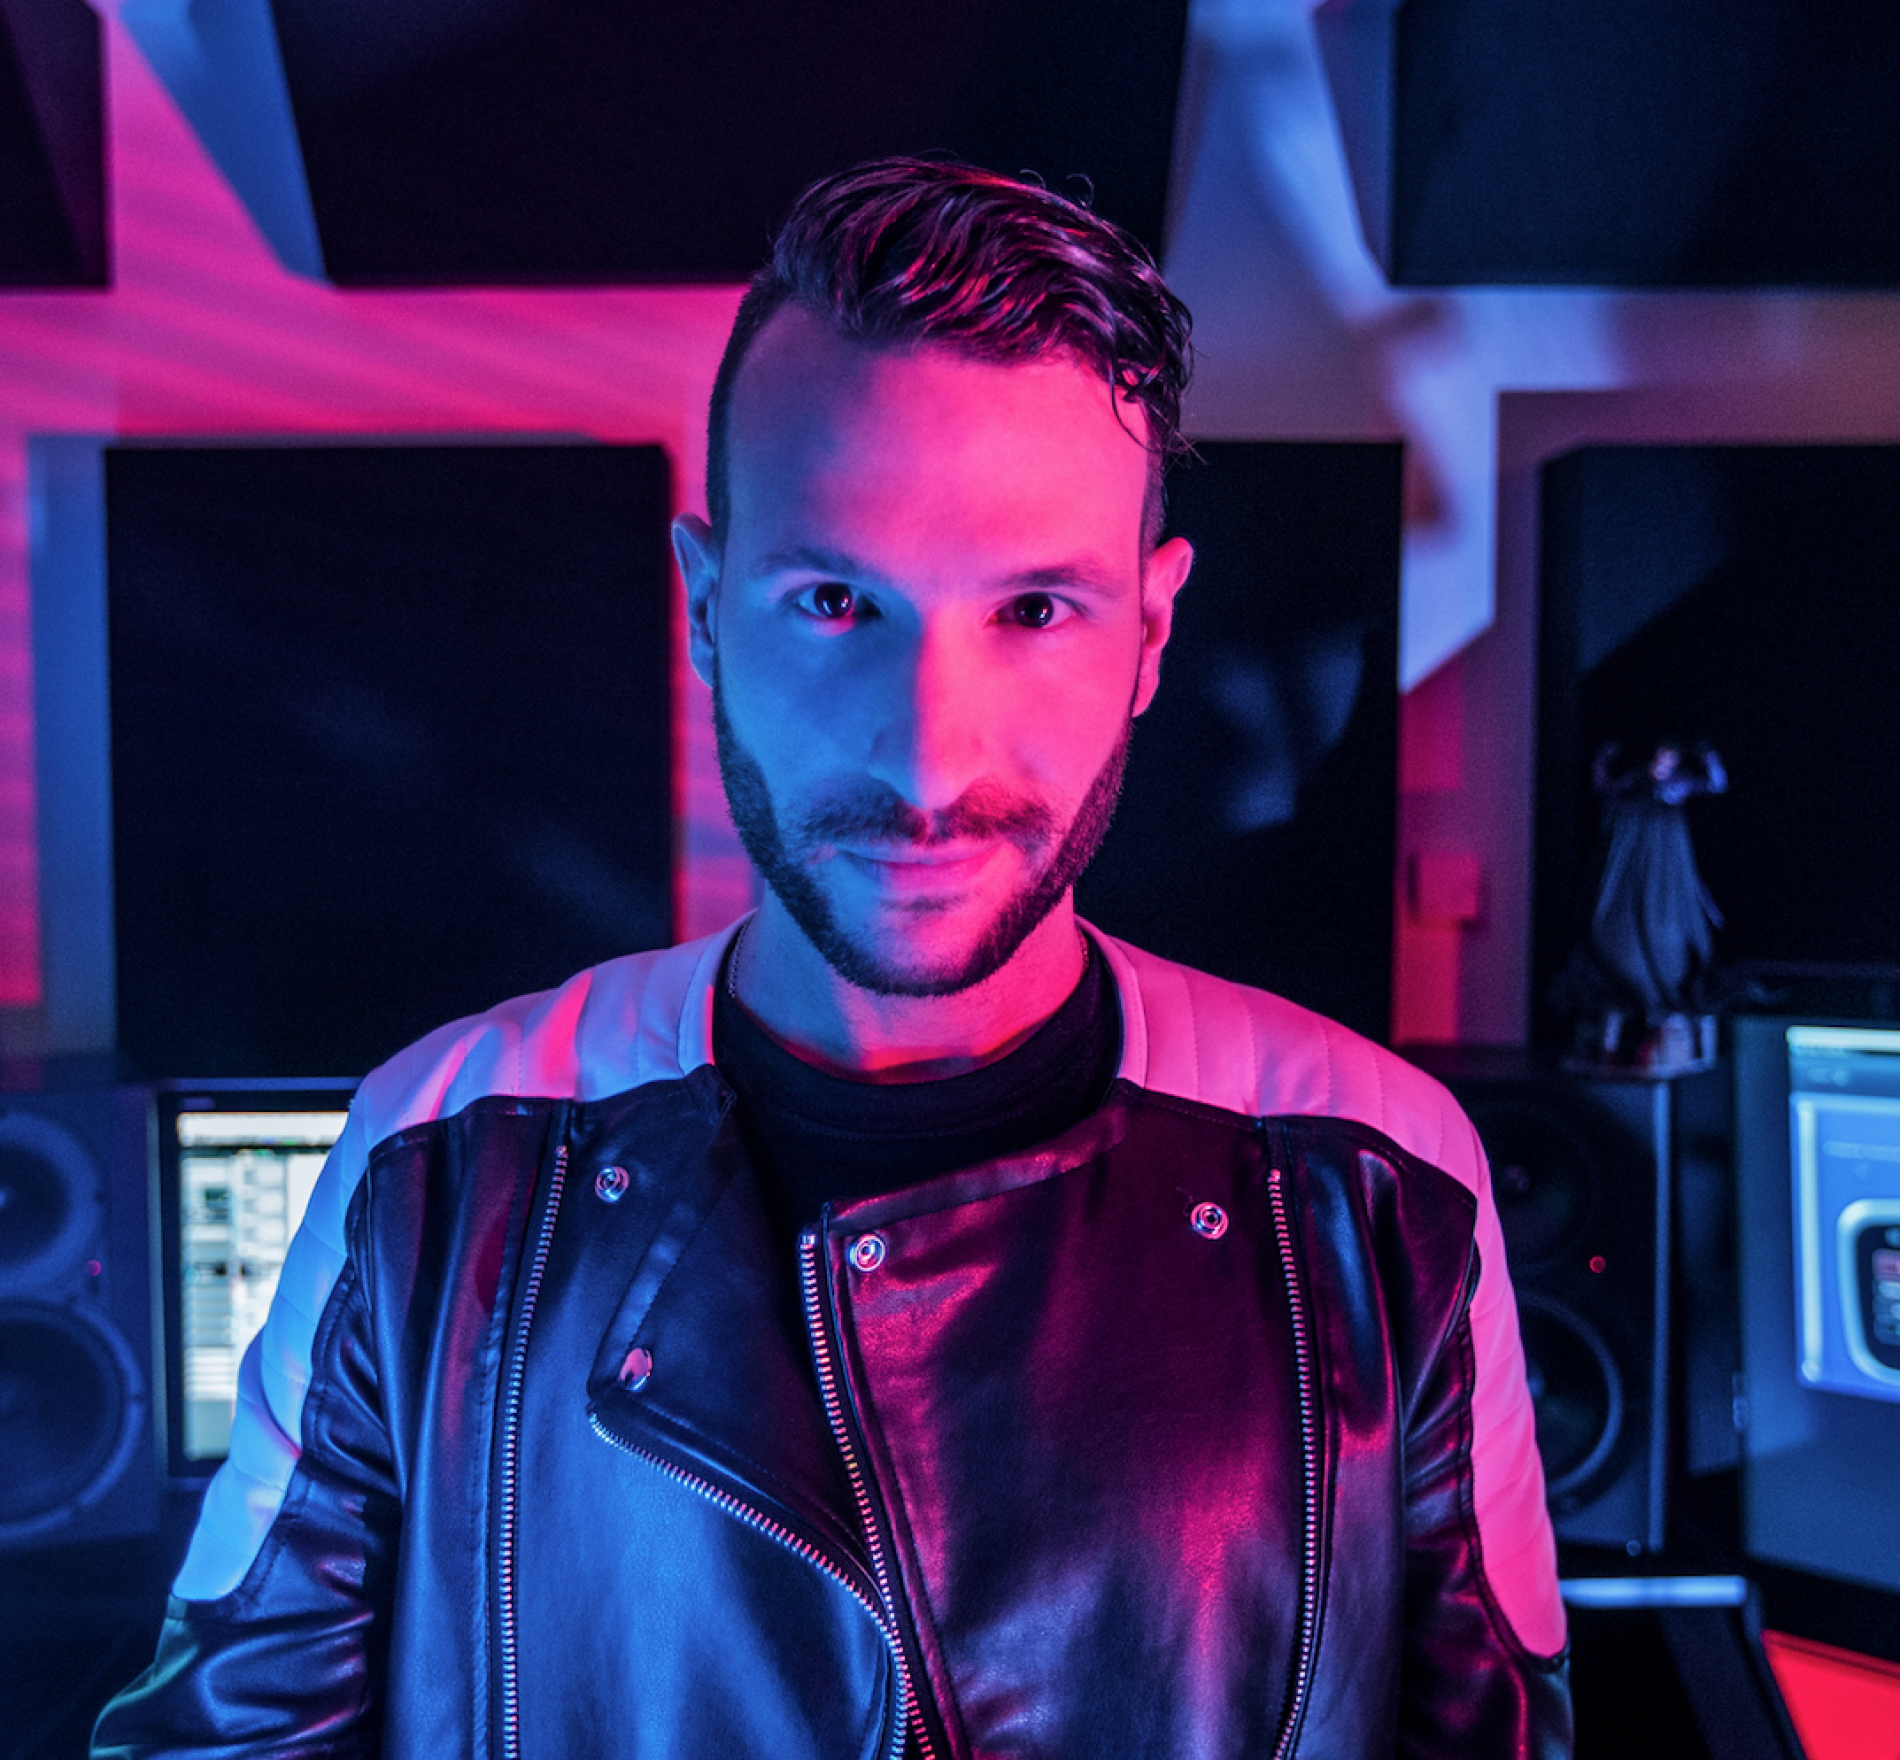 Don Diablo is going for 'Silence'